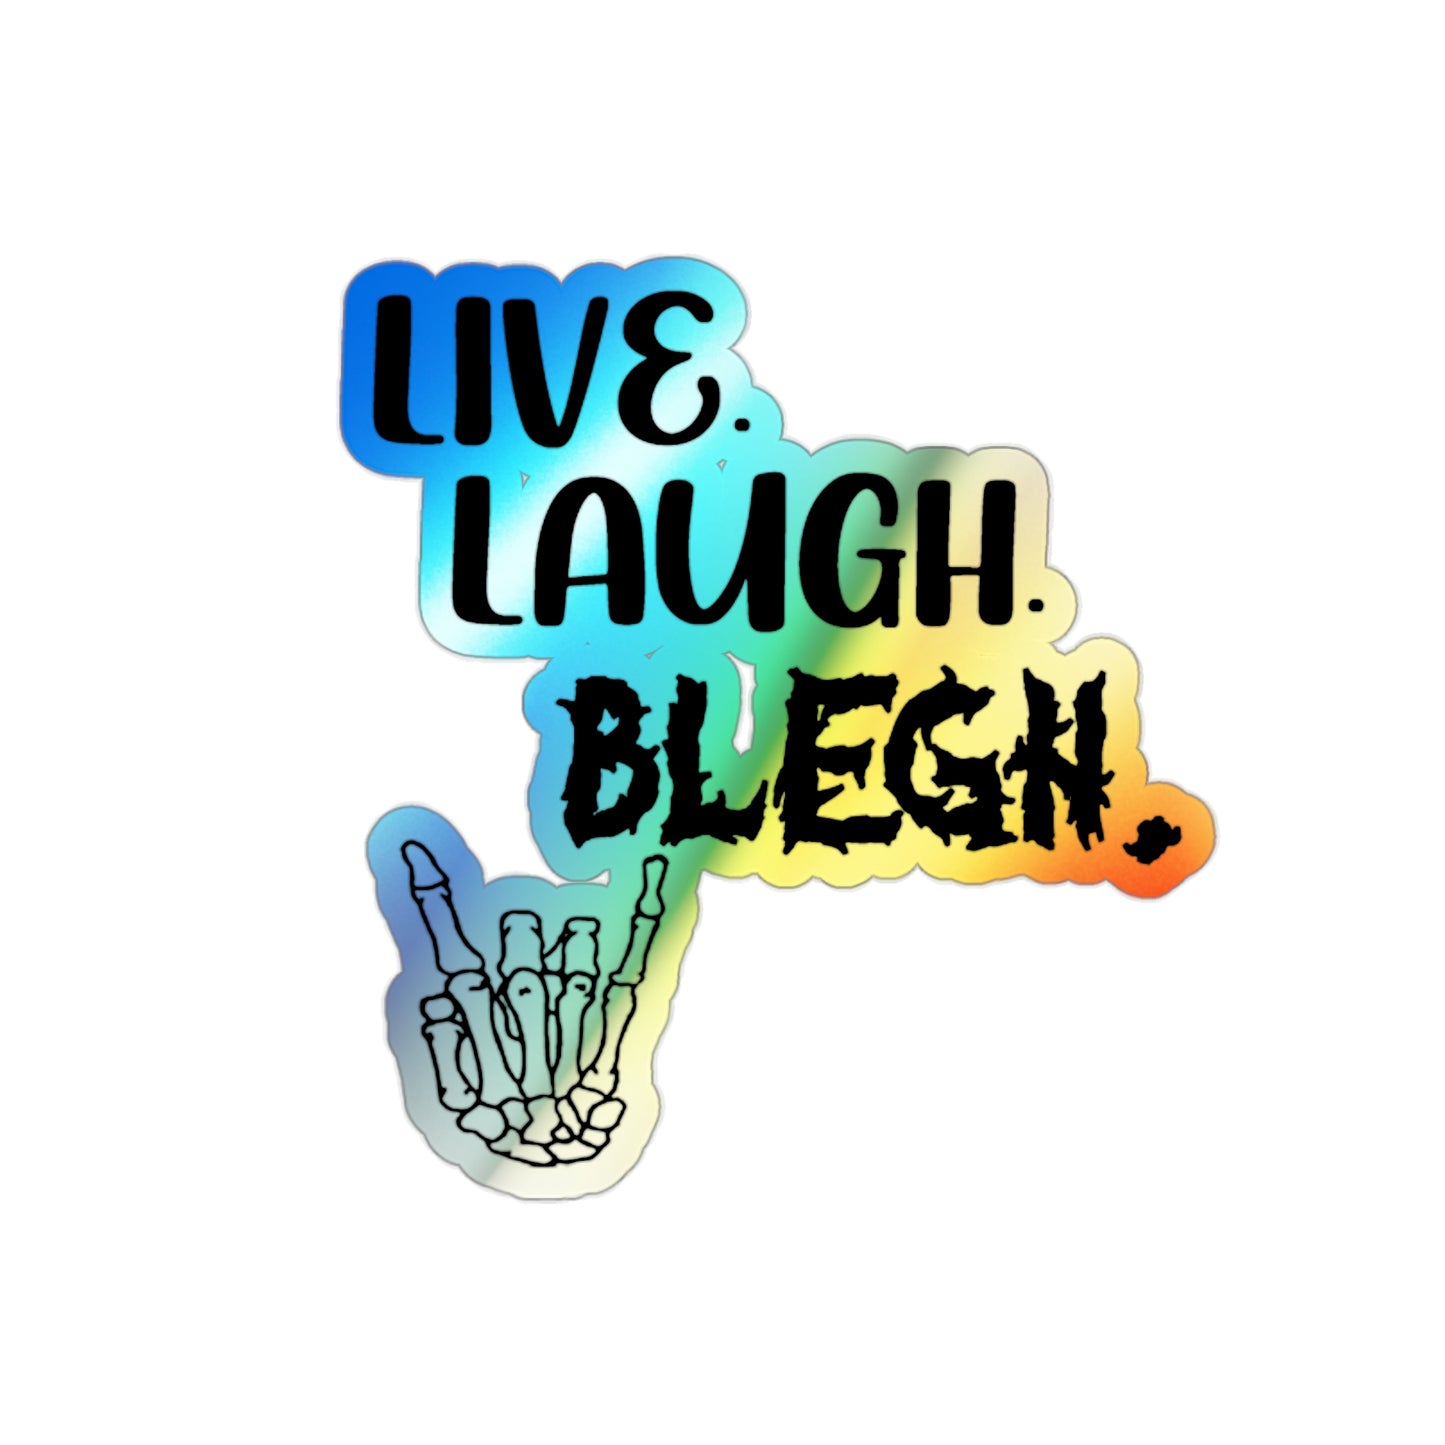 Live. Laugh. Blegh. Holographic Stickers